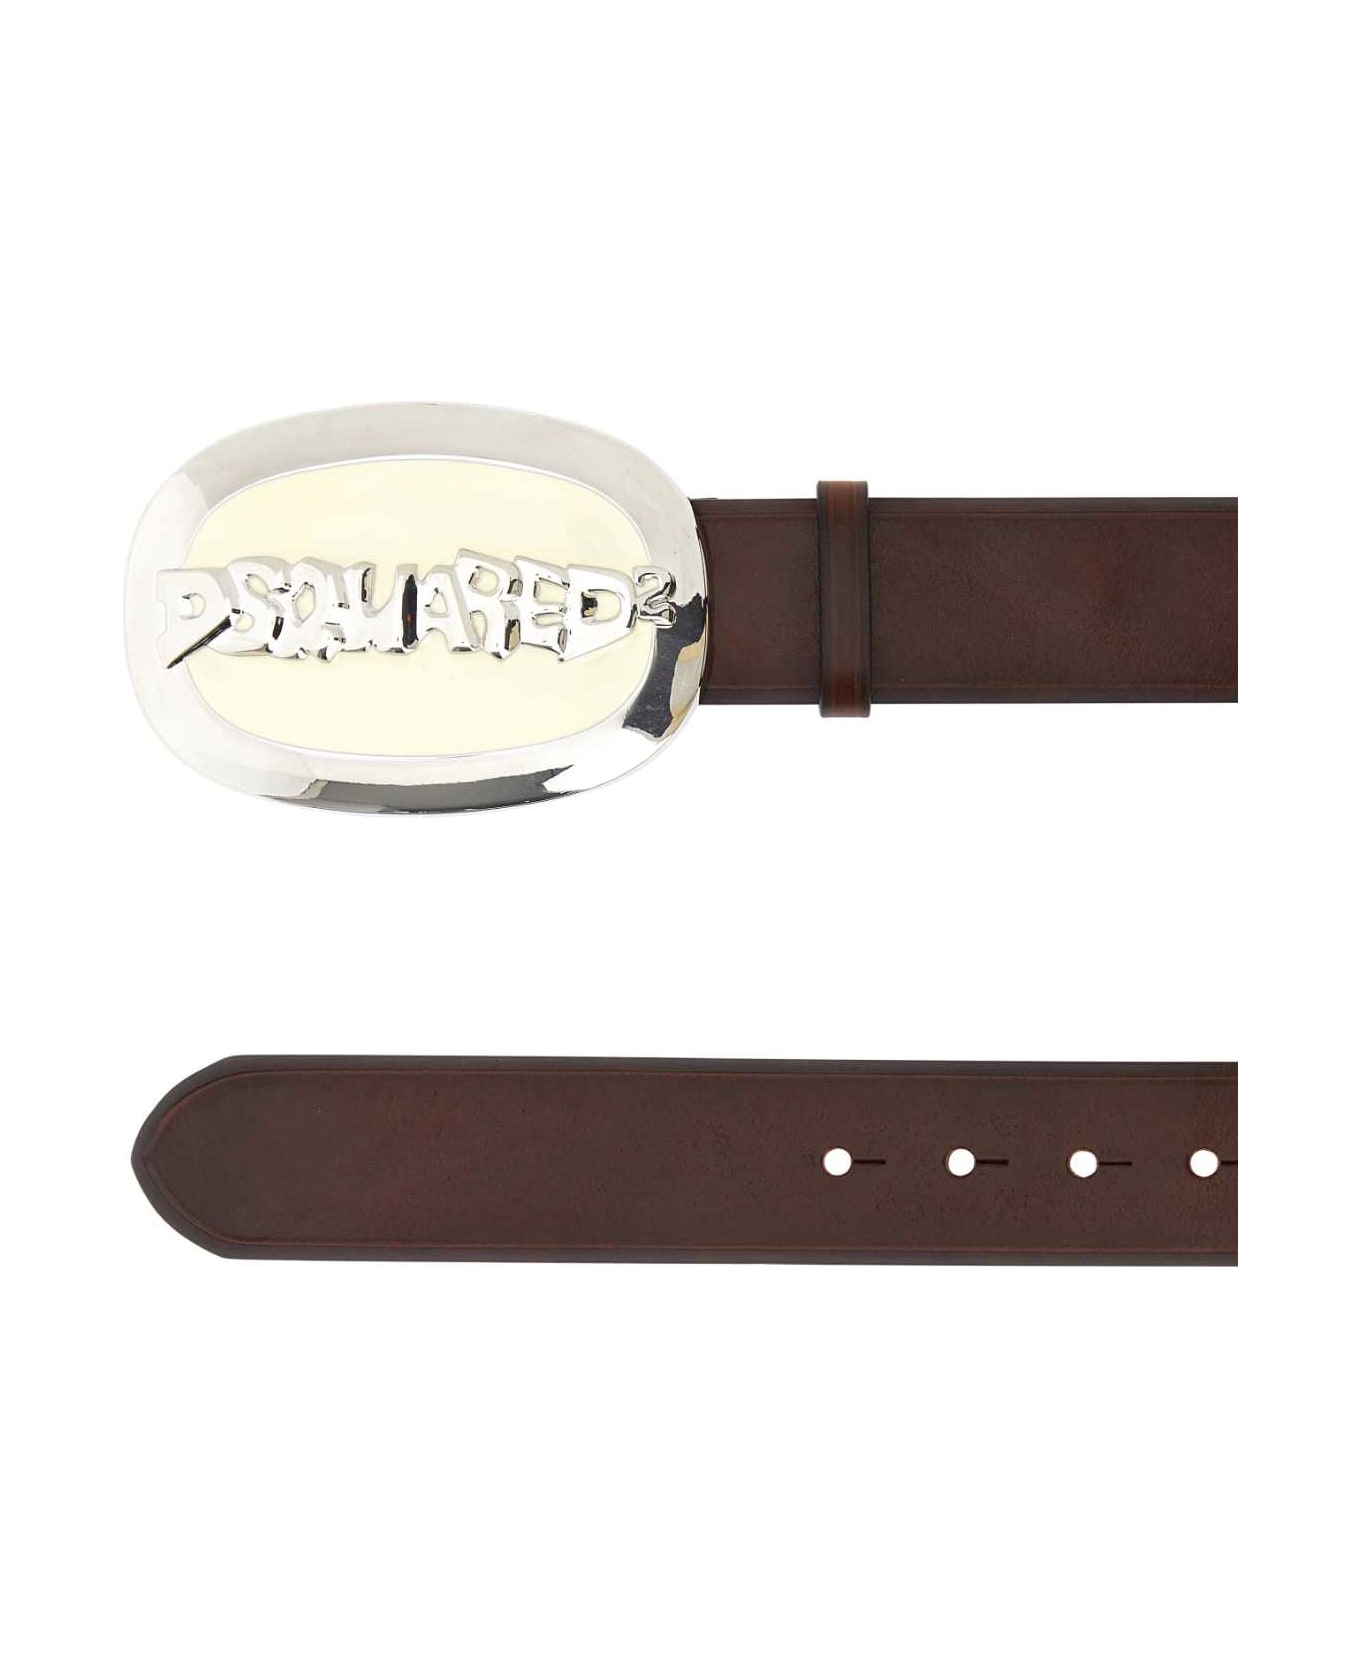 Dsquared2 Brown Leather Belt - M2830